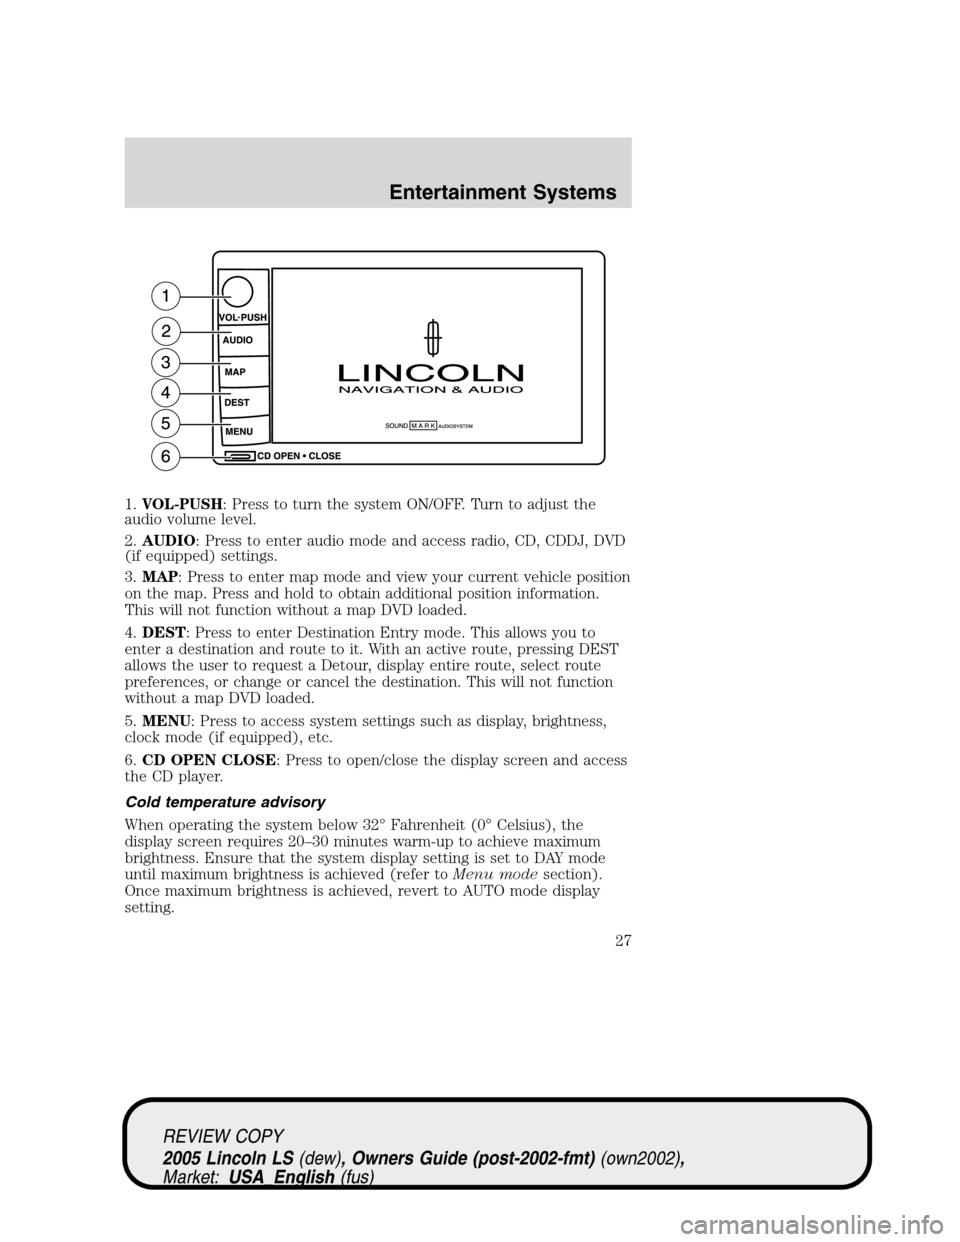 LINCOLN LS 2005  Owners Manual 1.VOL-PUSH: Press to turn the system ON/OFF. Turn to adjust the
audio volume level.
2.AUDIO: Press to enter audio mode and access radio, CD, CDDJ, DVD
(if equipped) settings.
3.MAP: Press to enter map